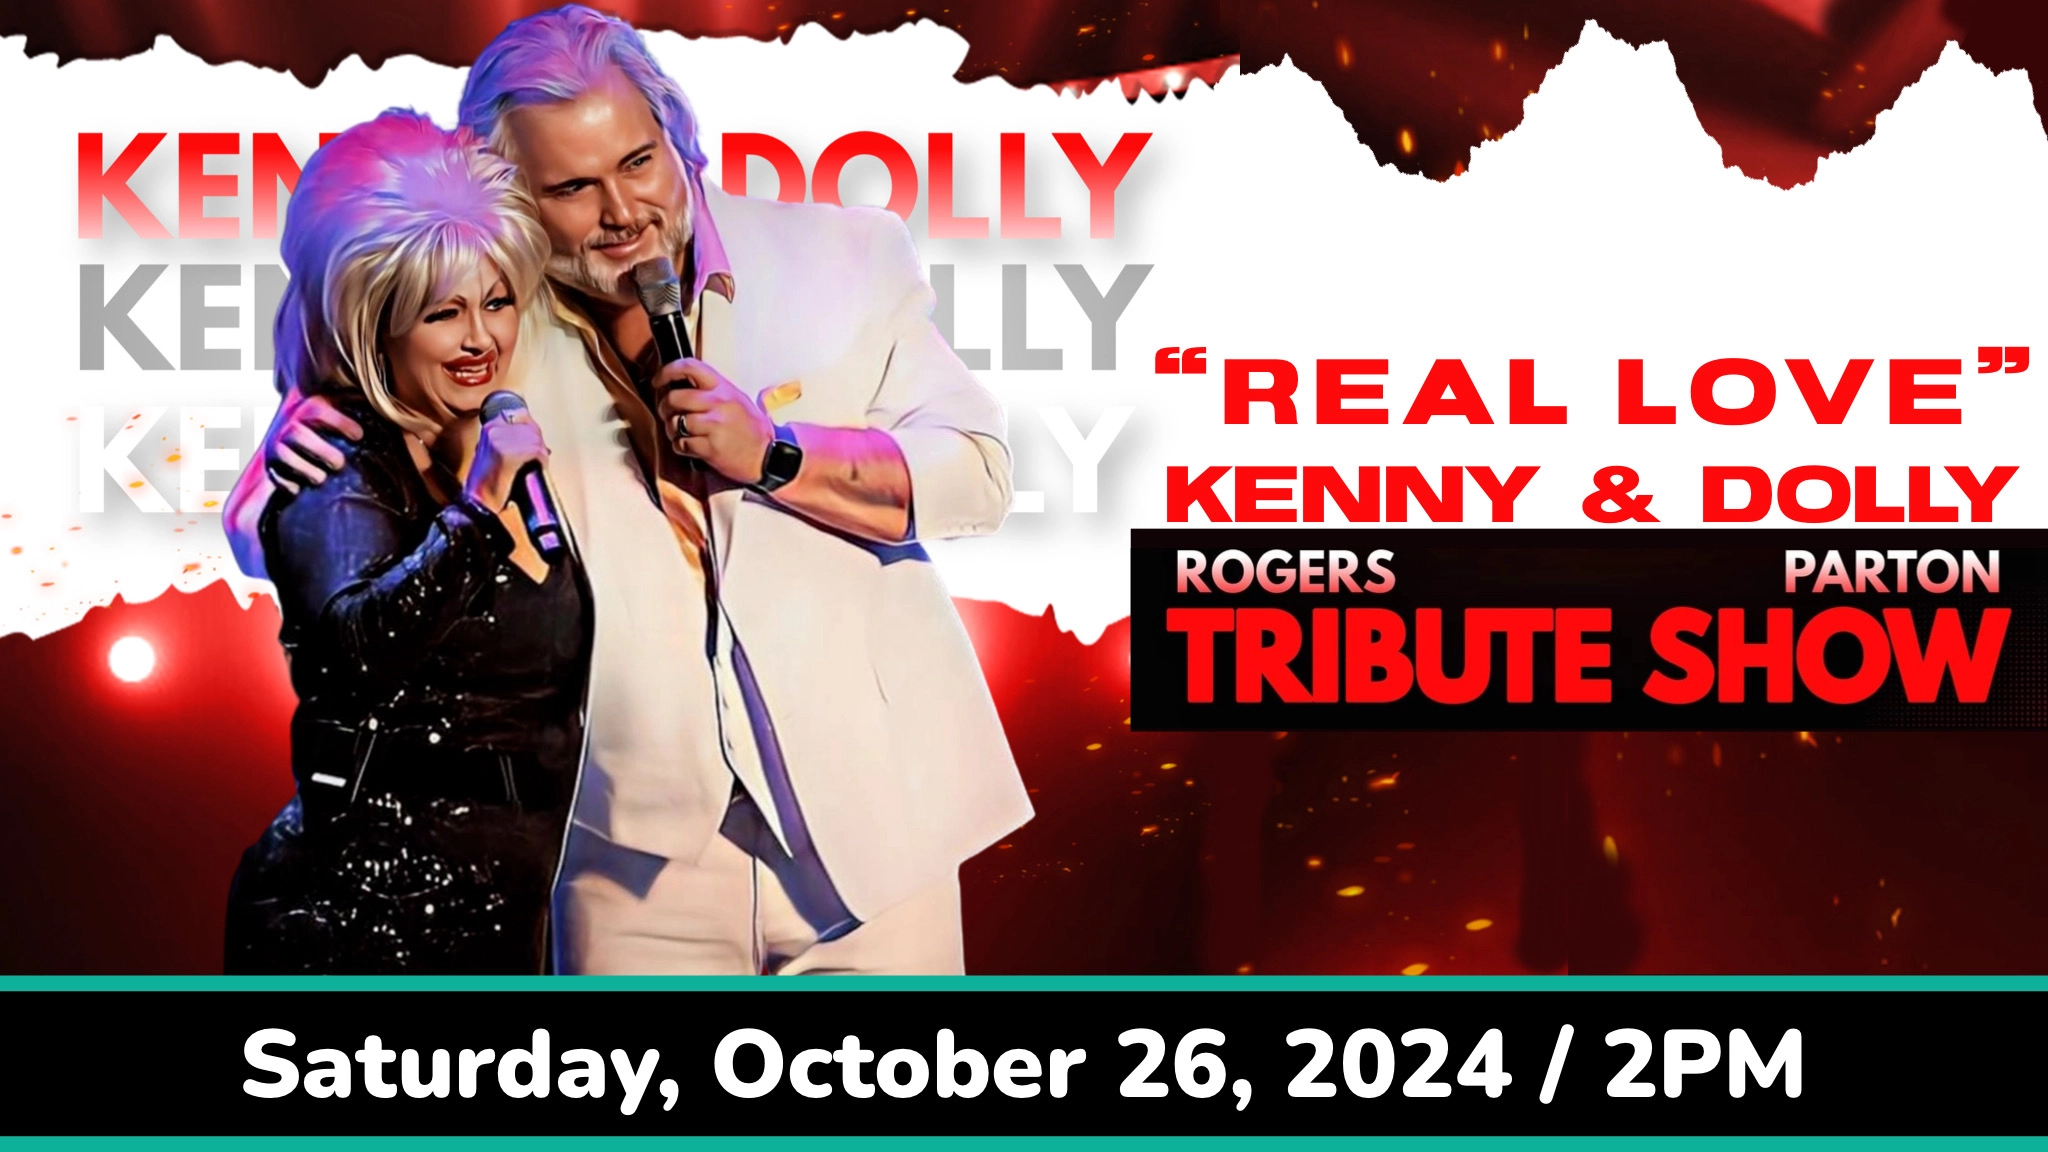 Kenny & Dolly: Real Love Tribute Show